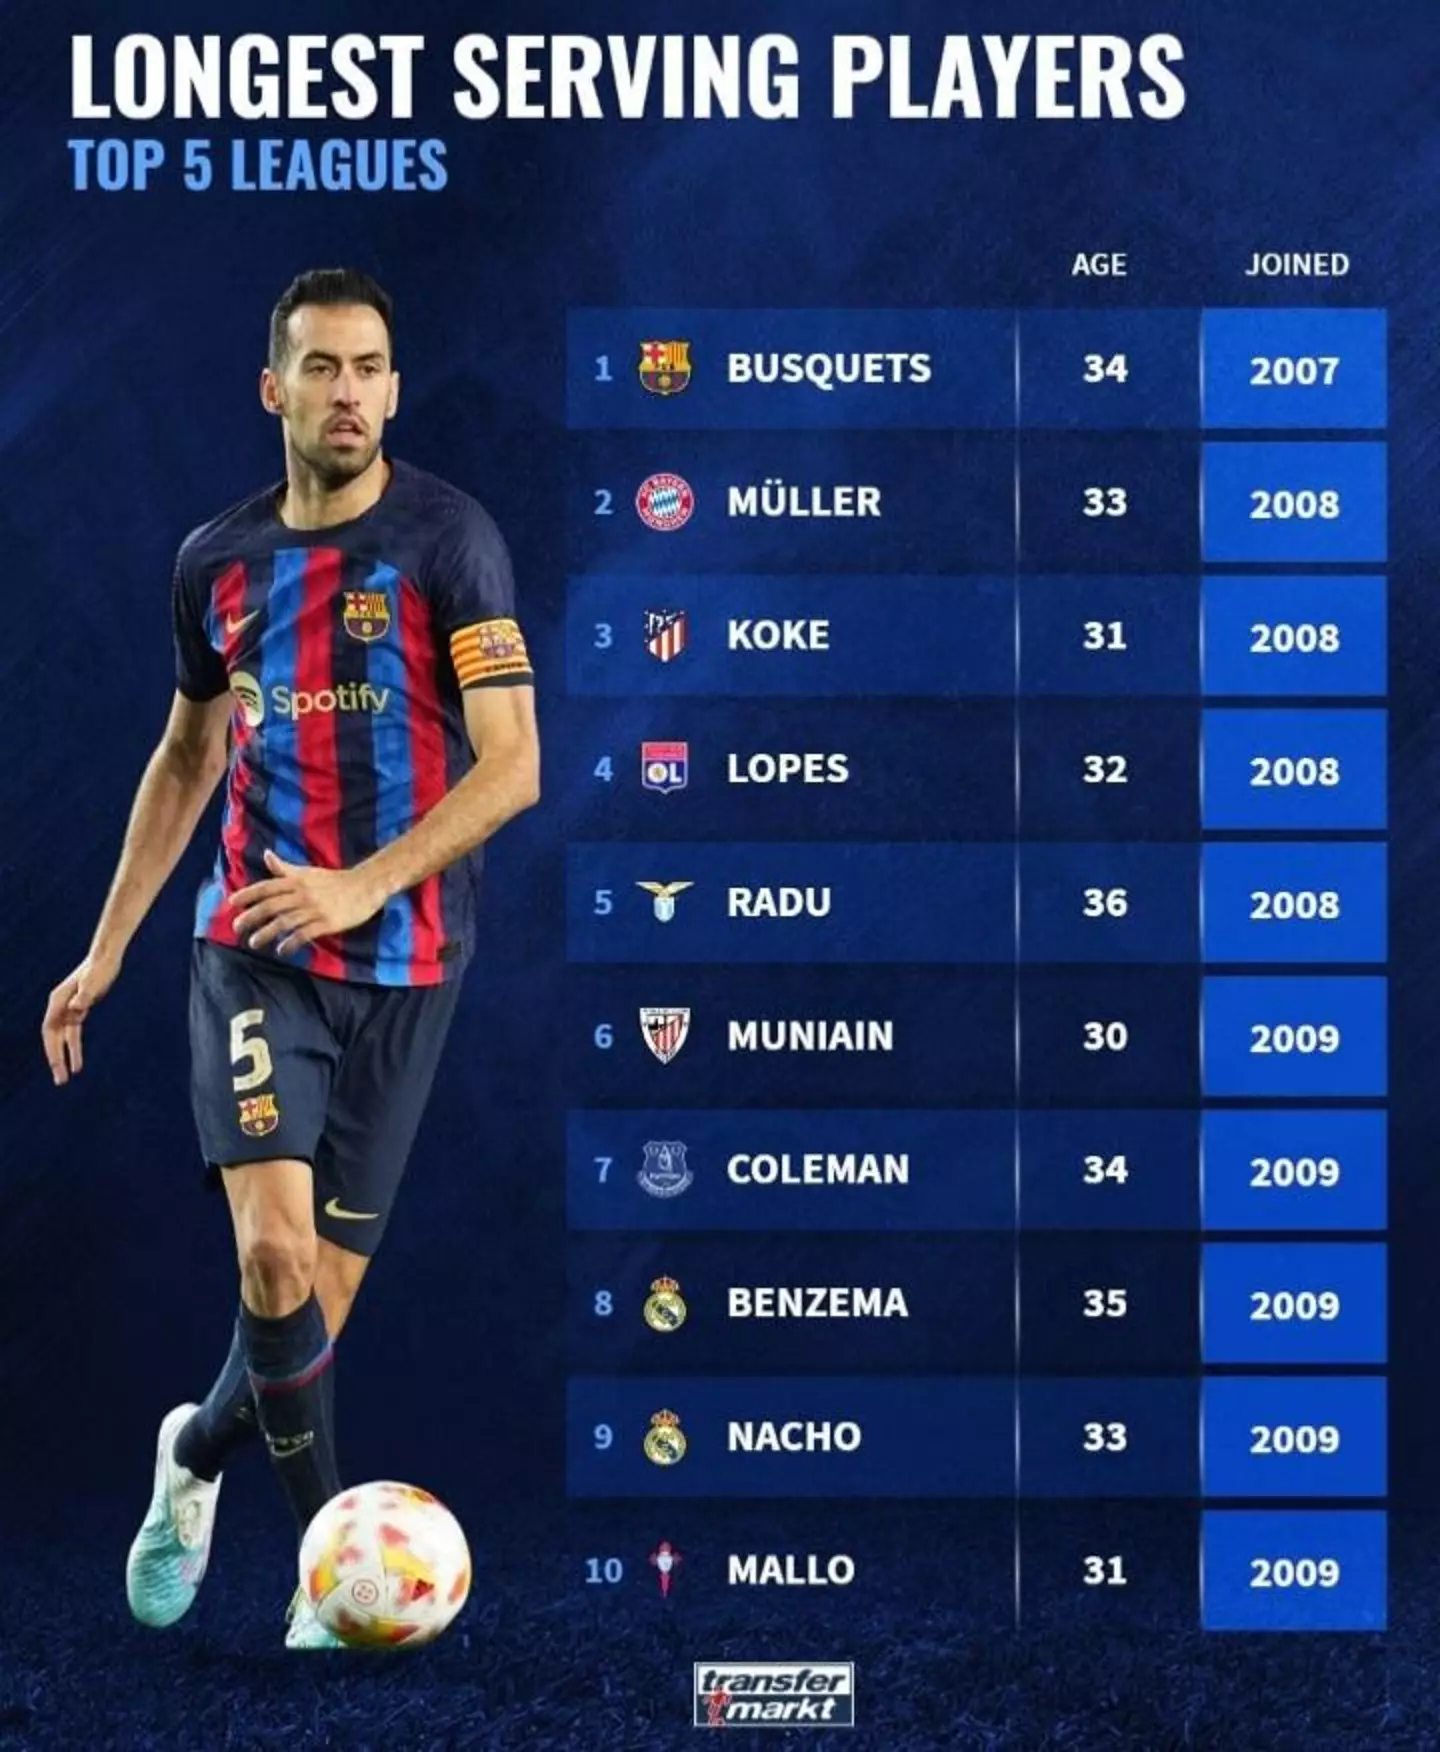 Busquets top of the list. Image: Transfermarkt